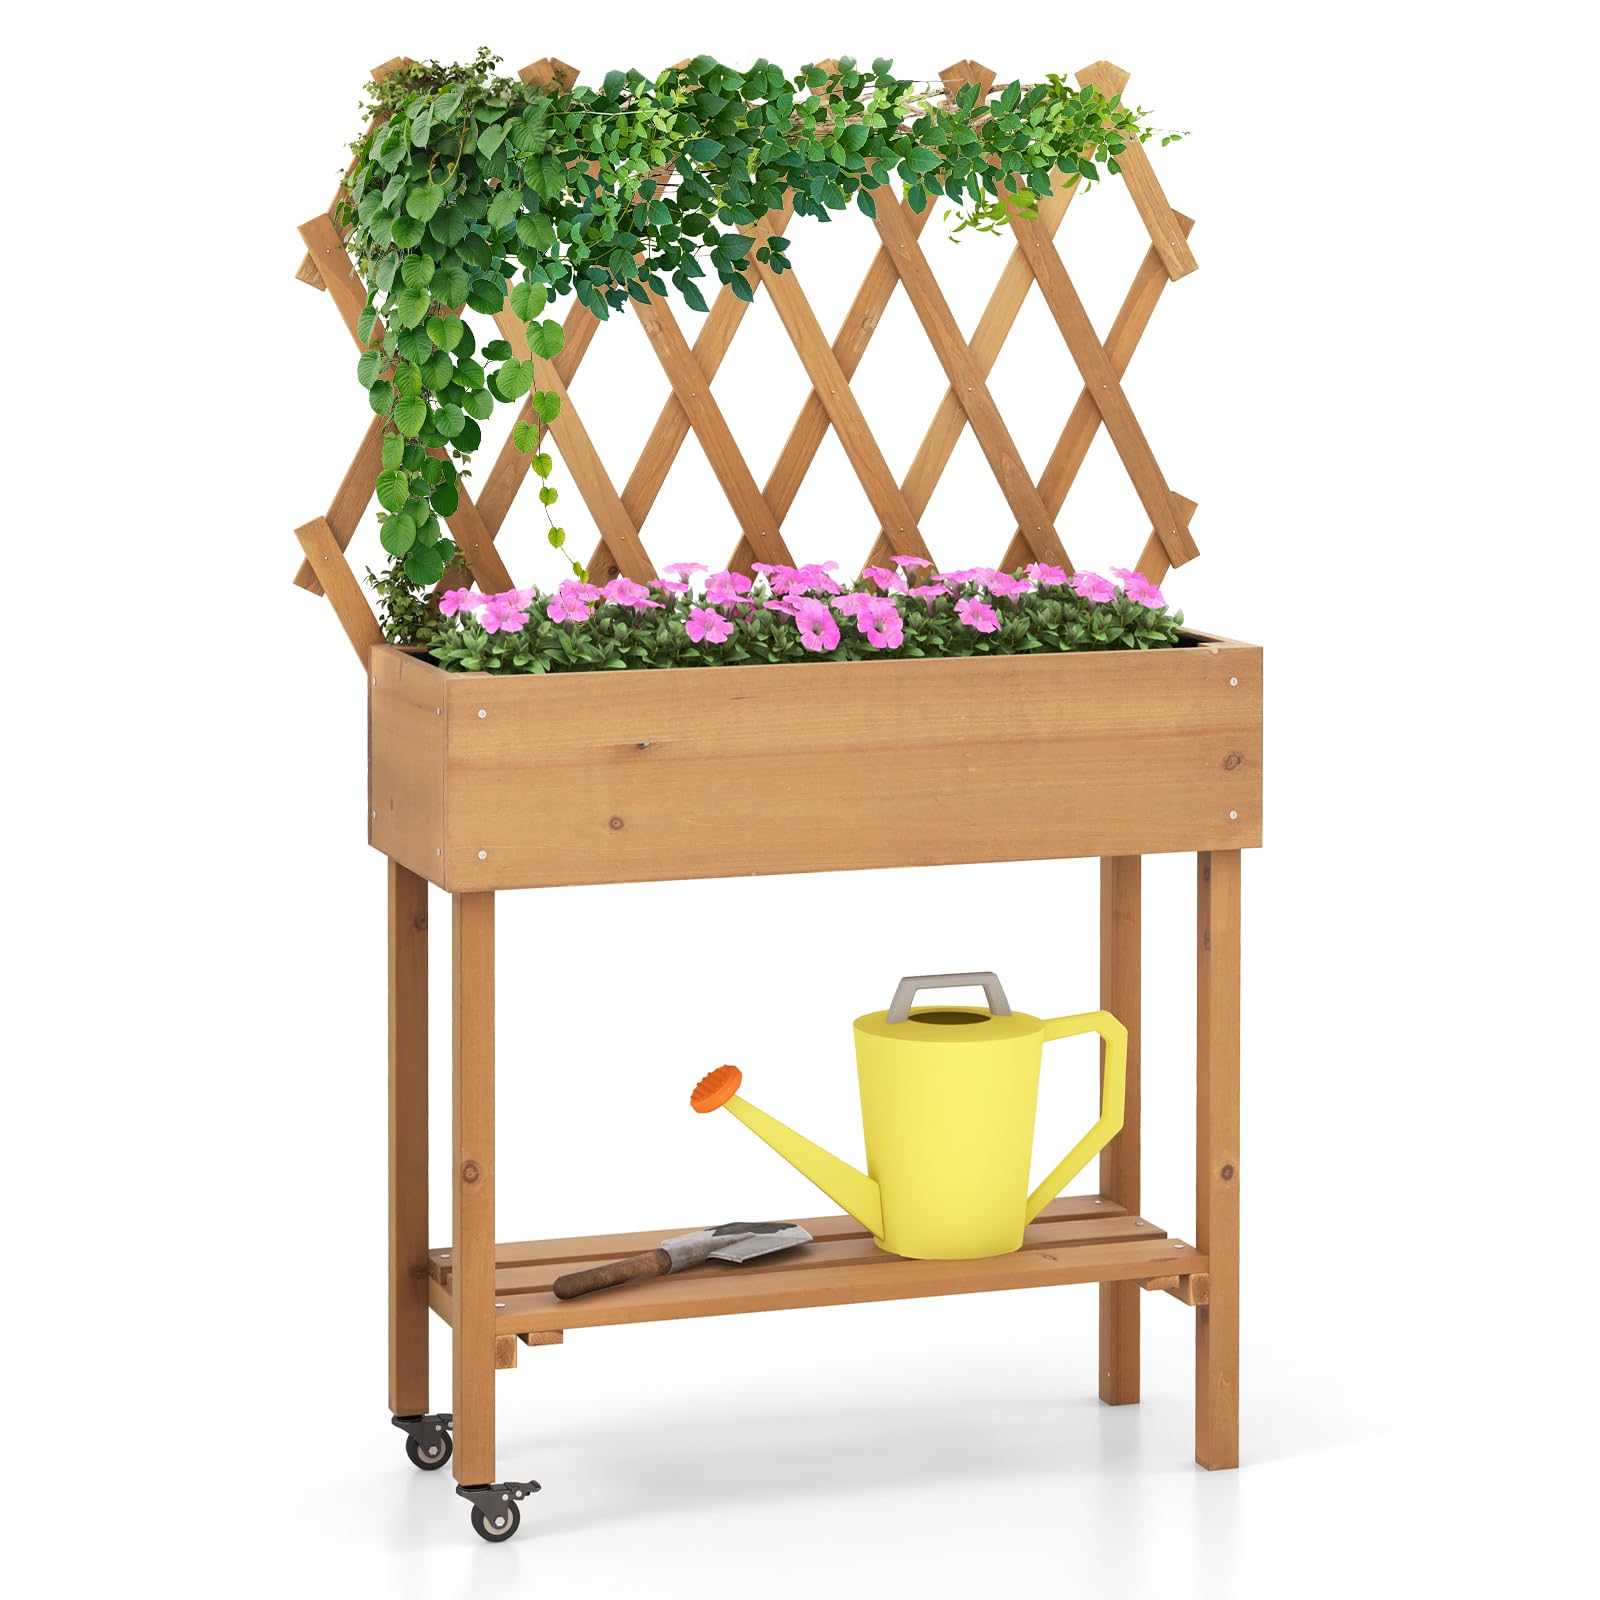 Giantex Raised Garden Bed on Wheels, Rolling Planter Boxes with Trelli